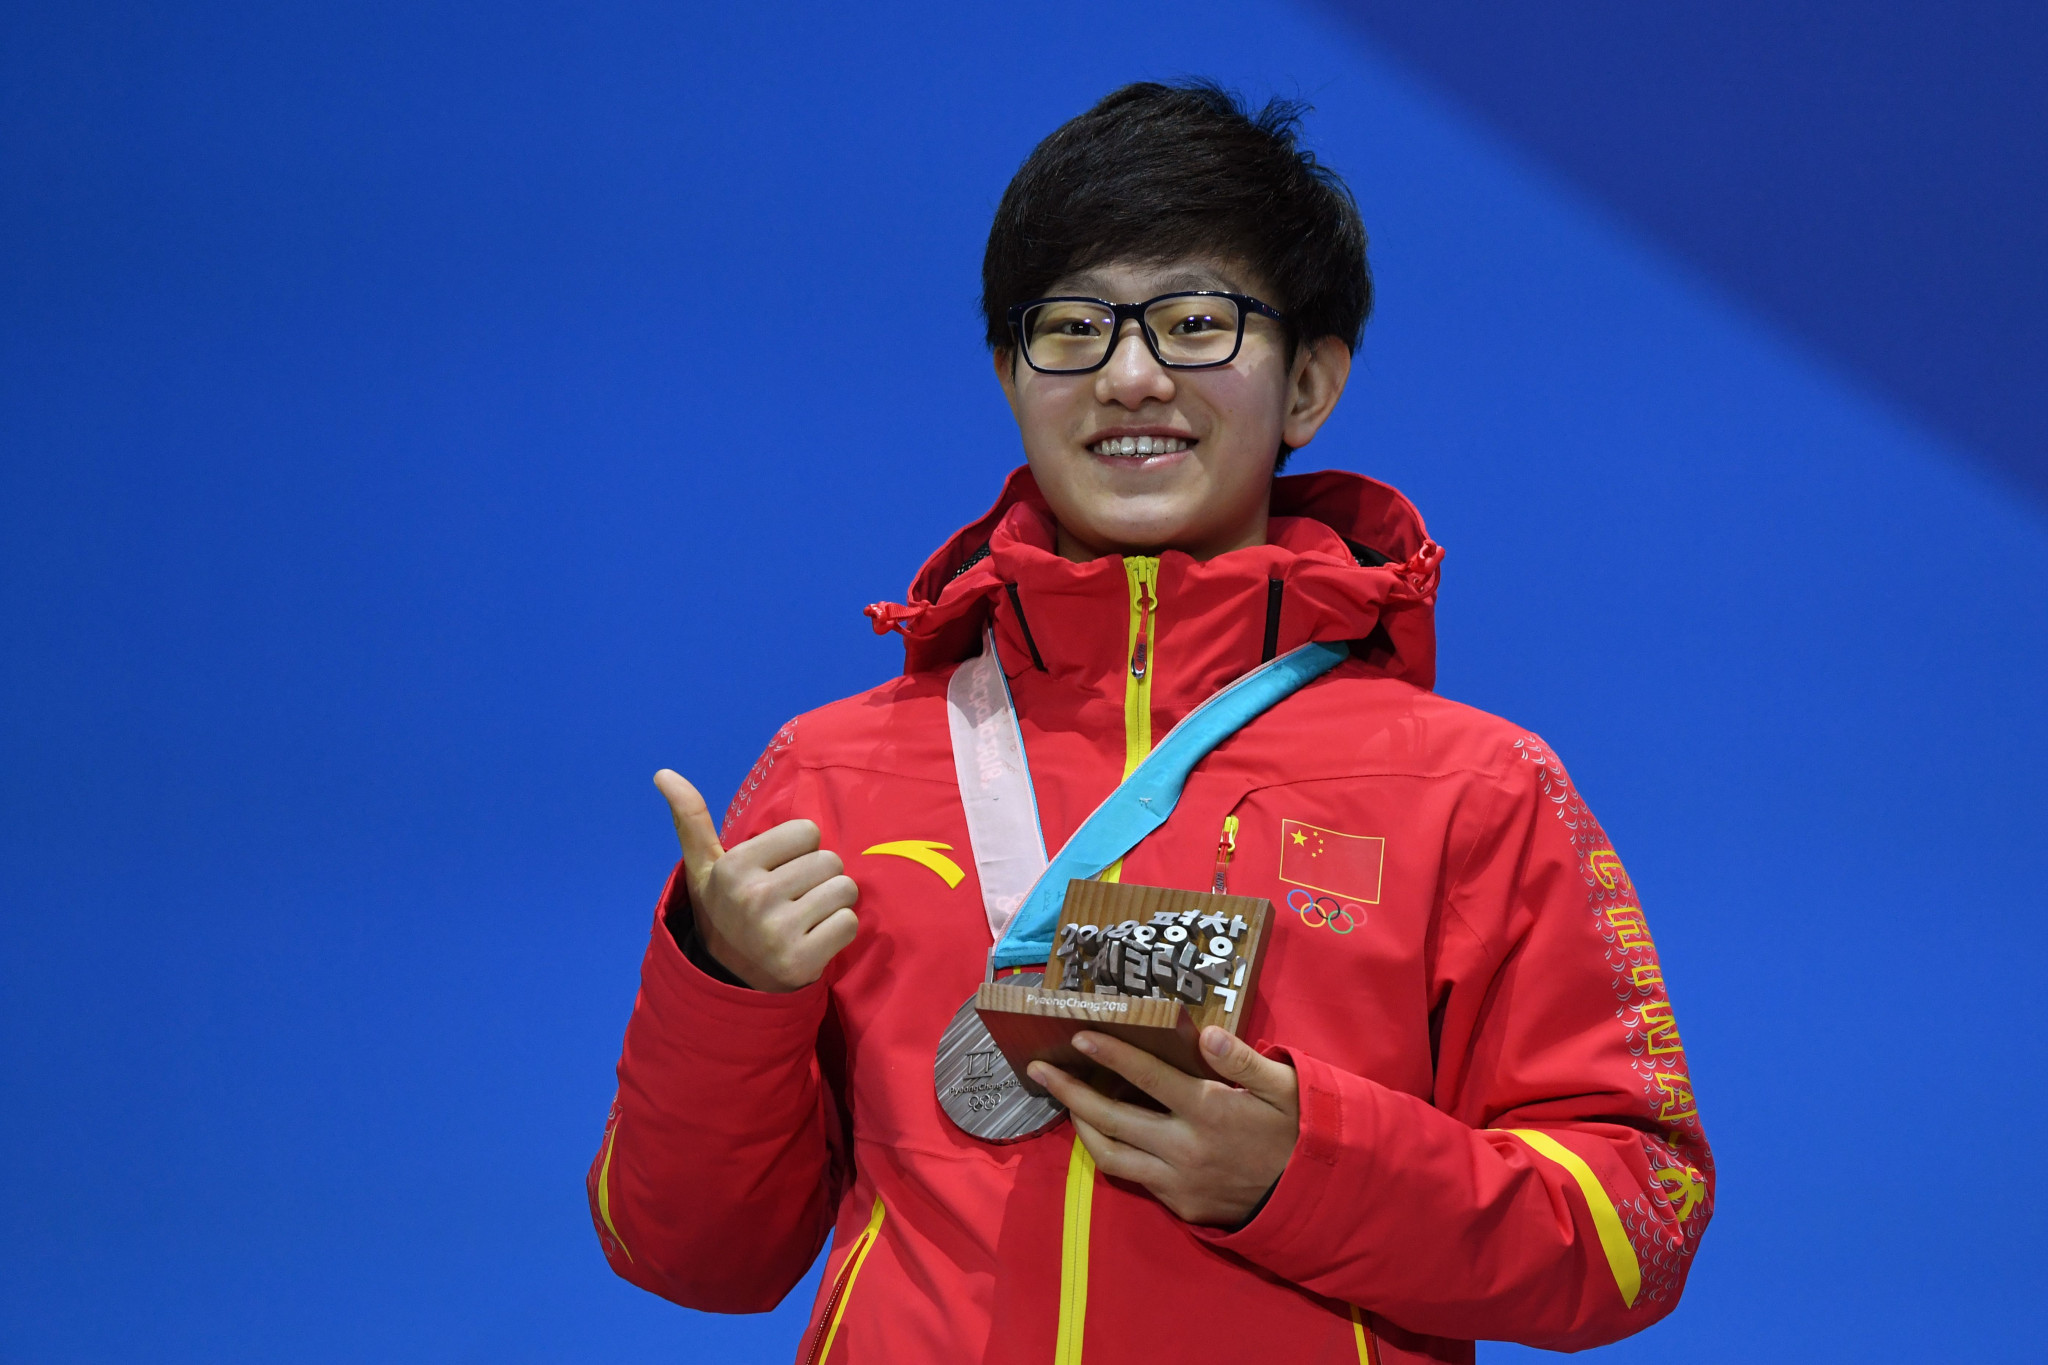  Jinyu Li, who won Olympic silver at 1,500m last year, won 1,000m gold today ©Getty Images